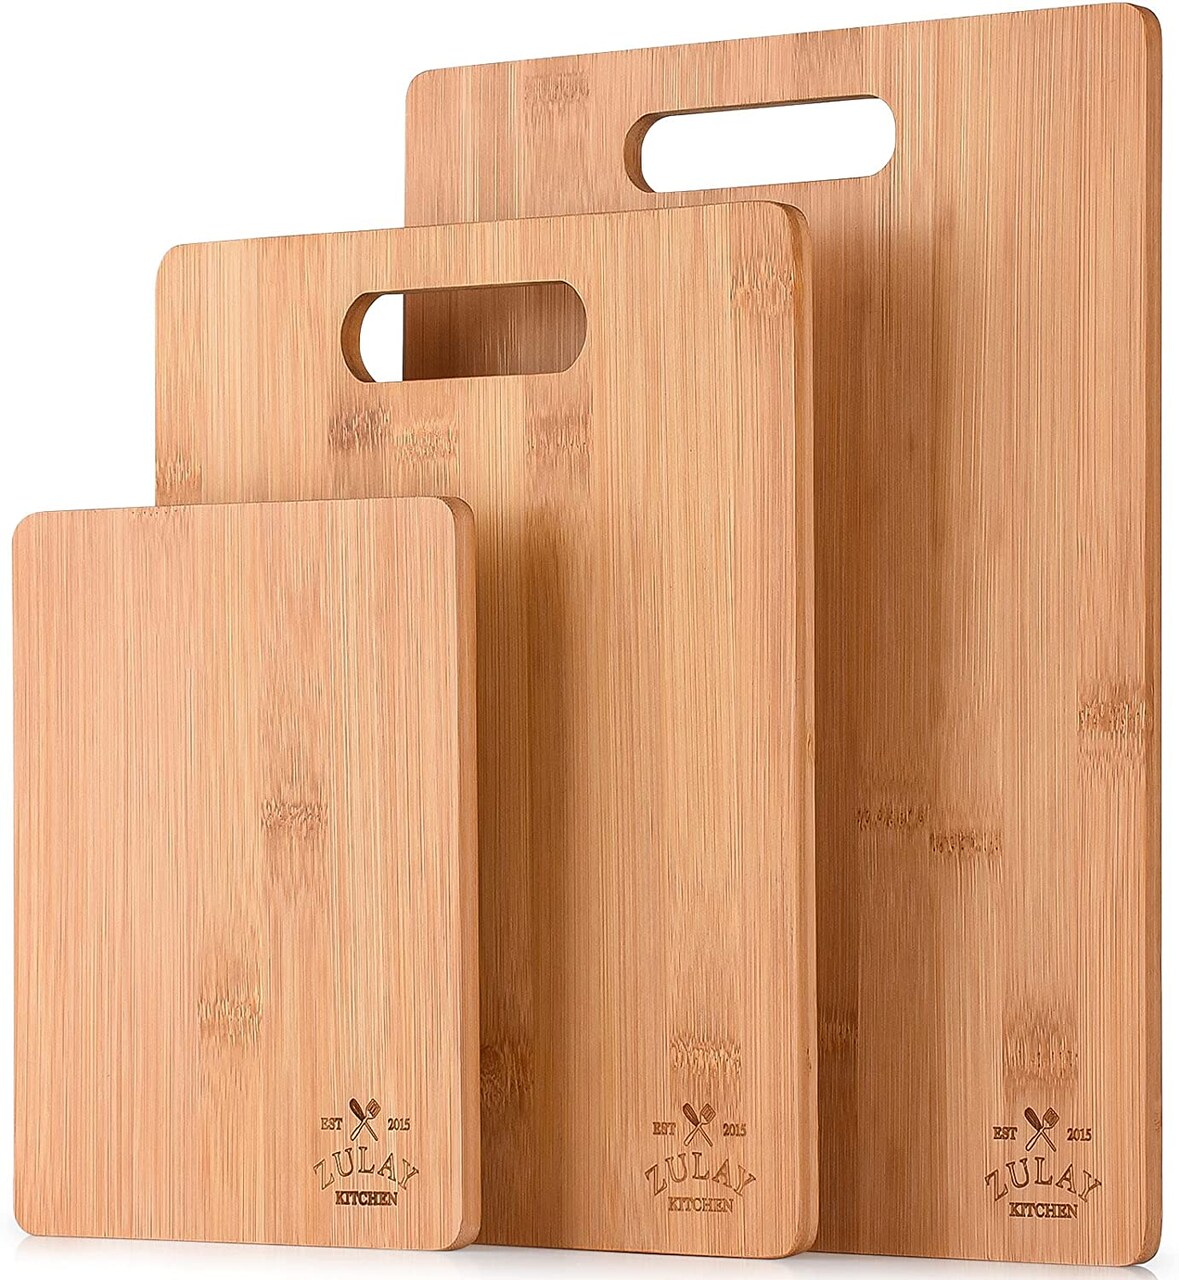 Zulay Bamboo Cutting Boards - 3 Pack